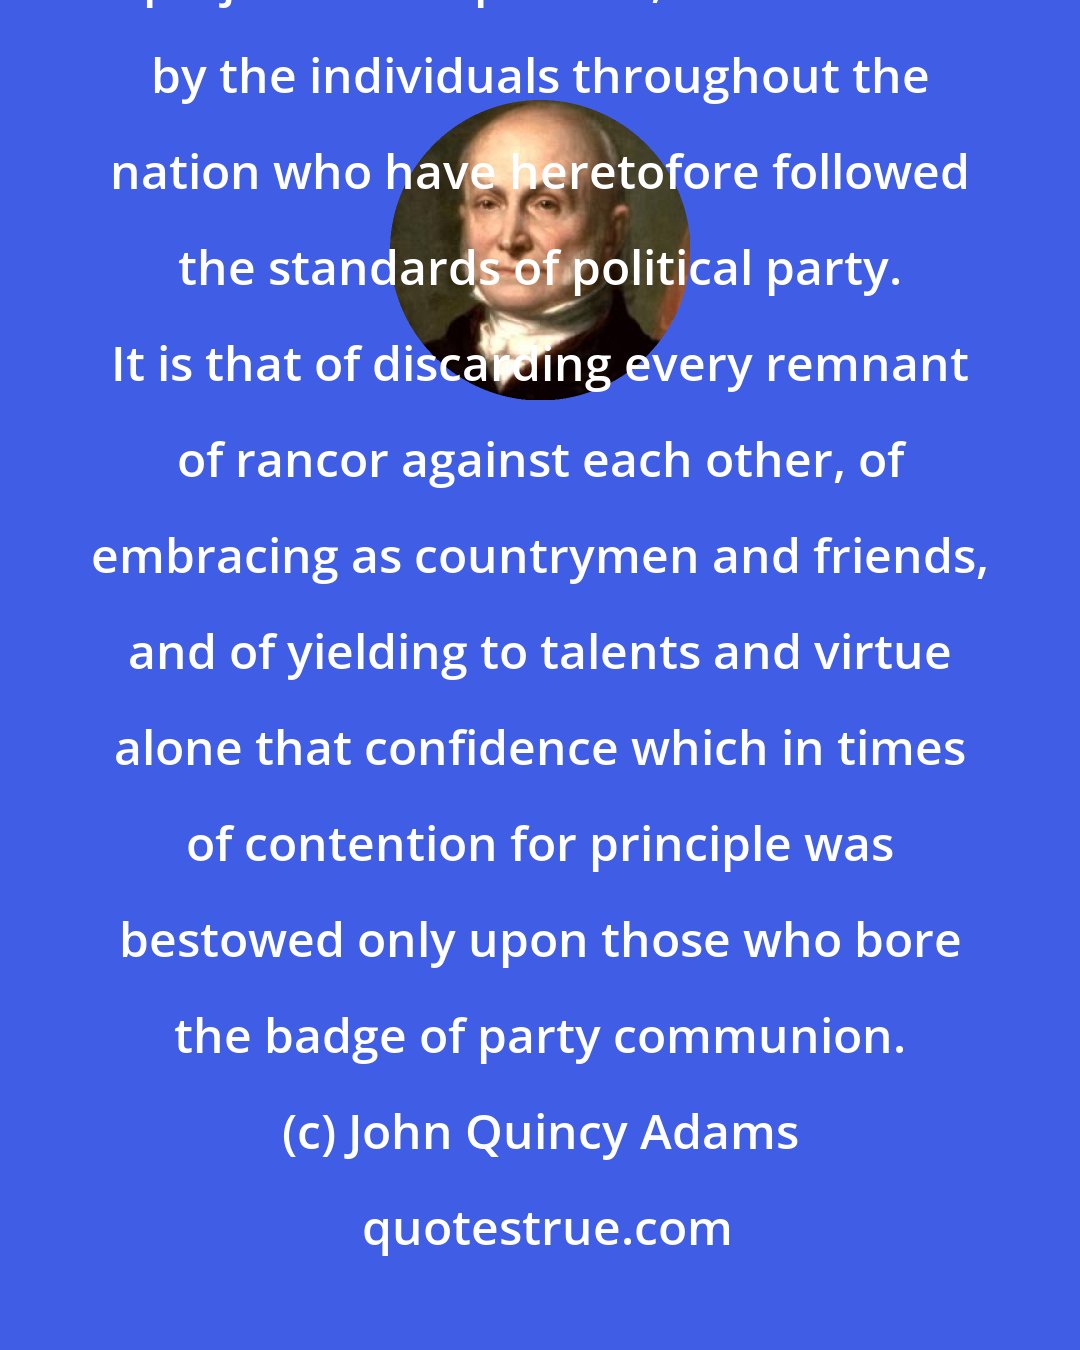 John Quincy Adams: There still remains one effort of magnanimity, one sacrifice of prejudice and passion, to be made by the individuals throughout the nation who have heretofore followed the standards of political party. It is that of discarding every remnant of rancor against each other, of embracing as countrymen and friends, and of yielding to talents and virtue alone that confidence which in times of contention for principle was bestowed only upon those who bore the badge of party communion.